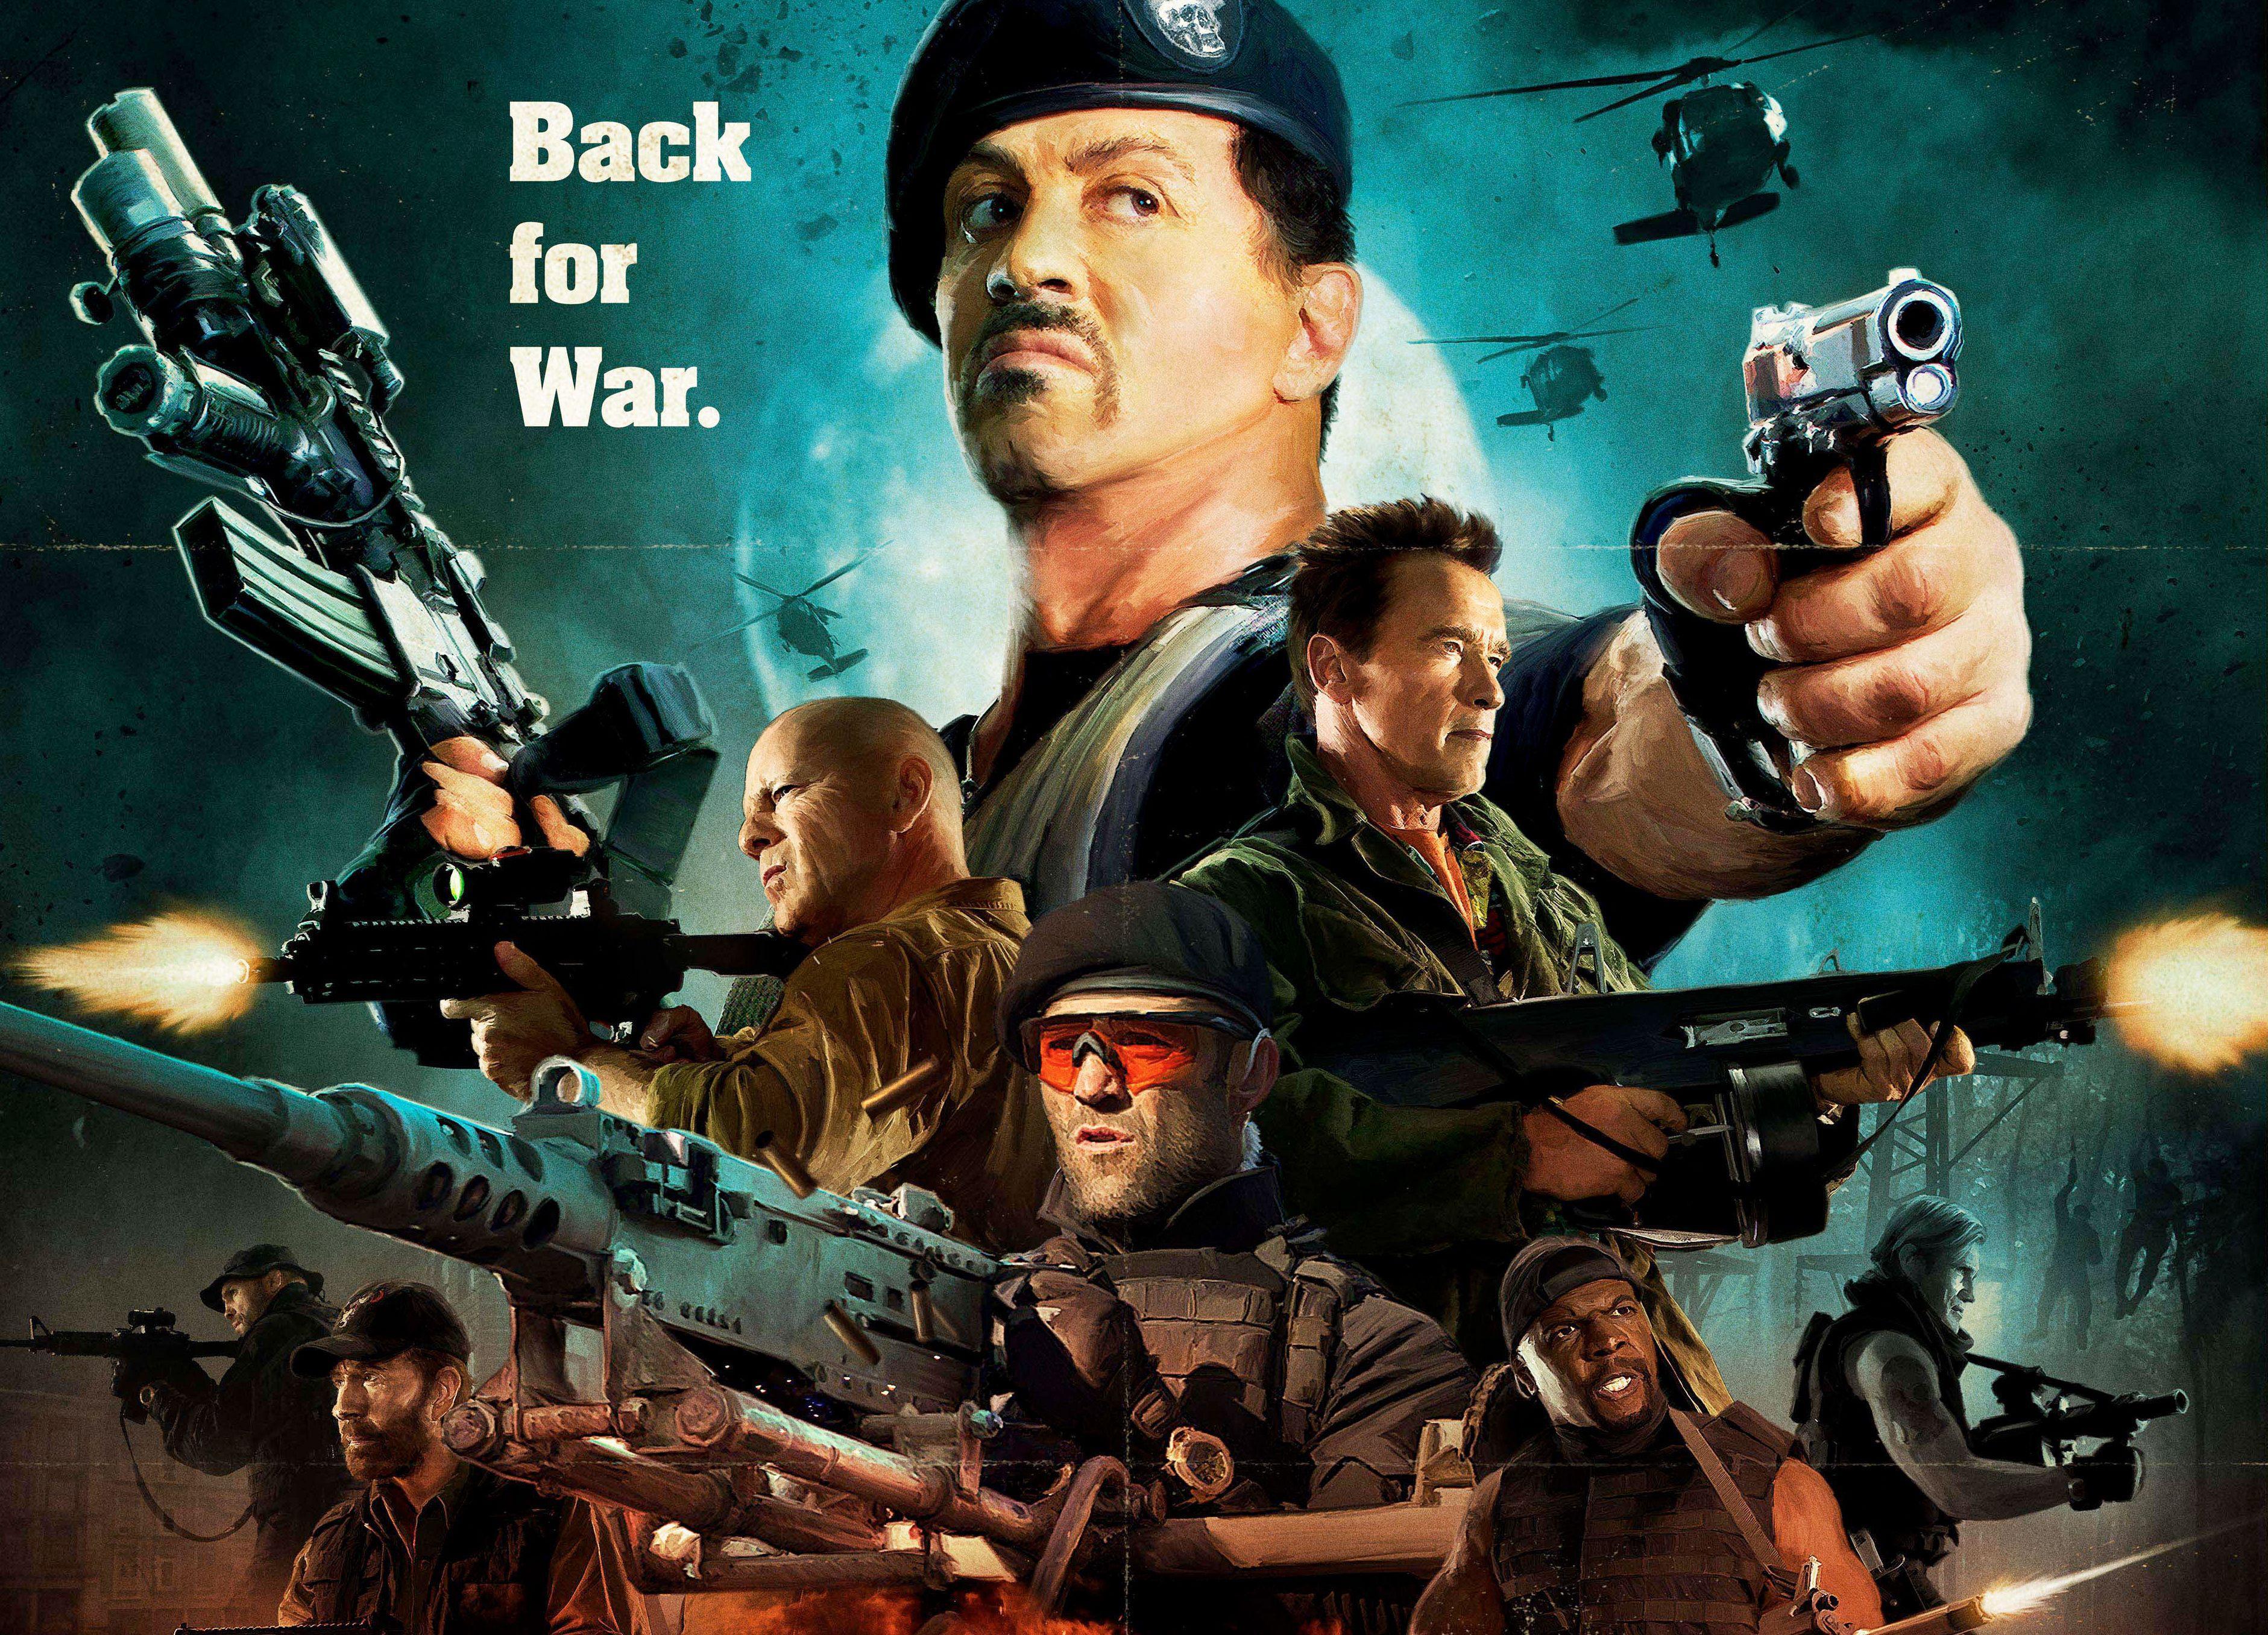 The Expendables HD Wallpaper. Background